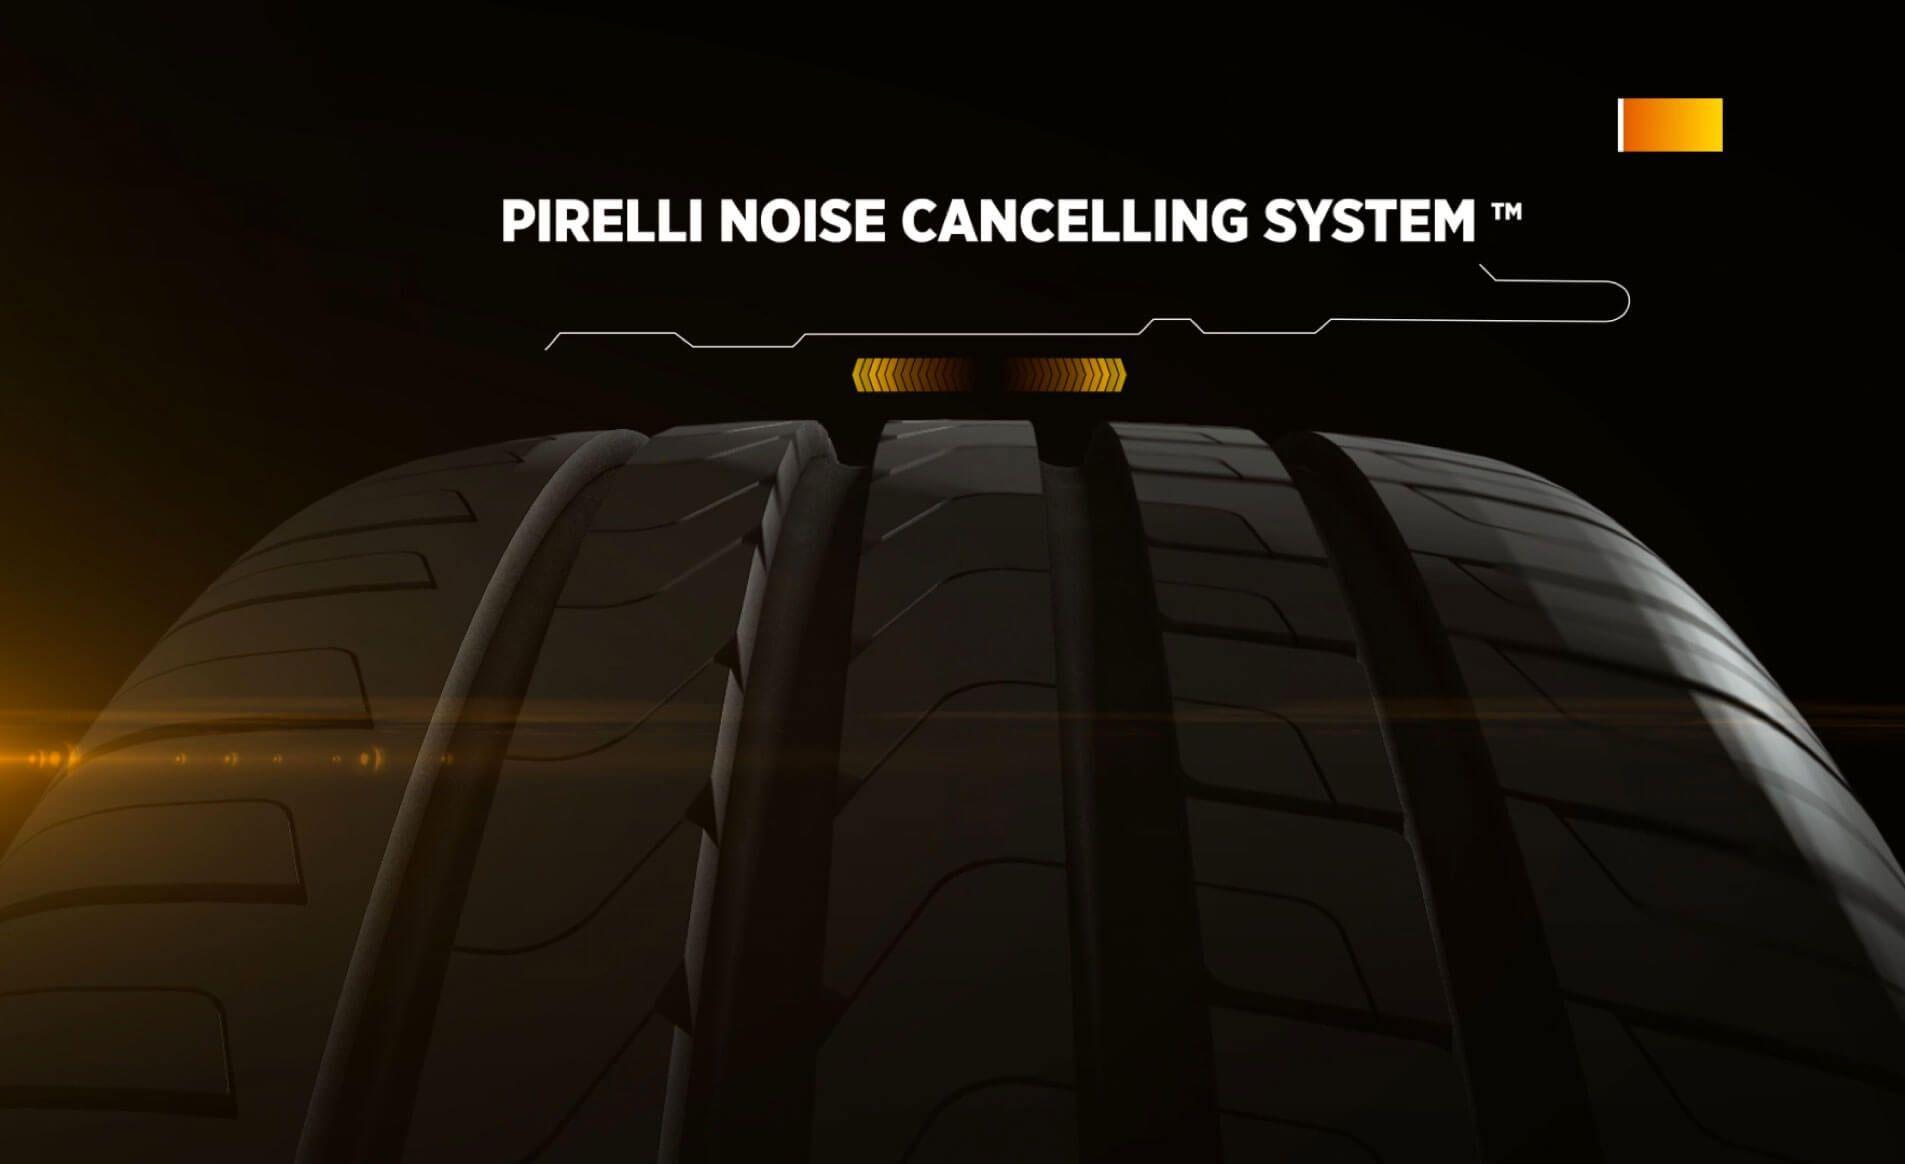 HOW PNCS TYRES WORK